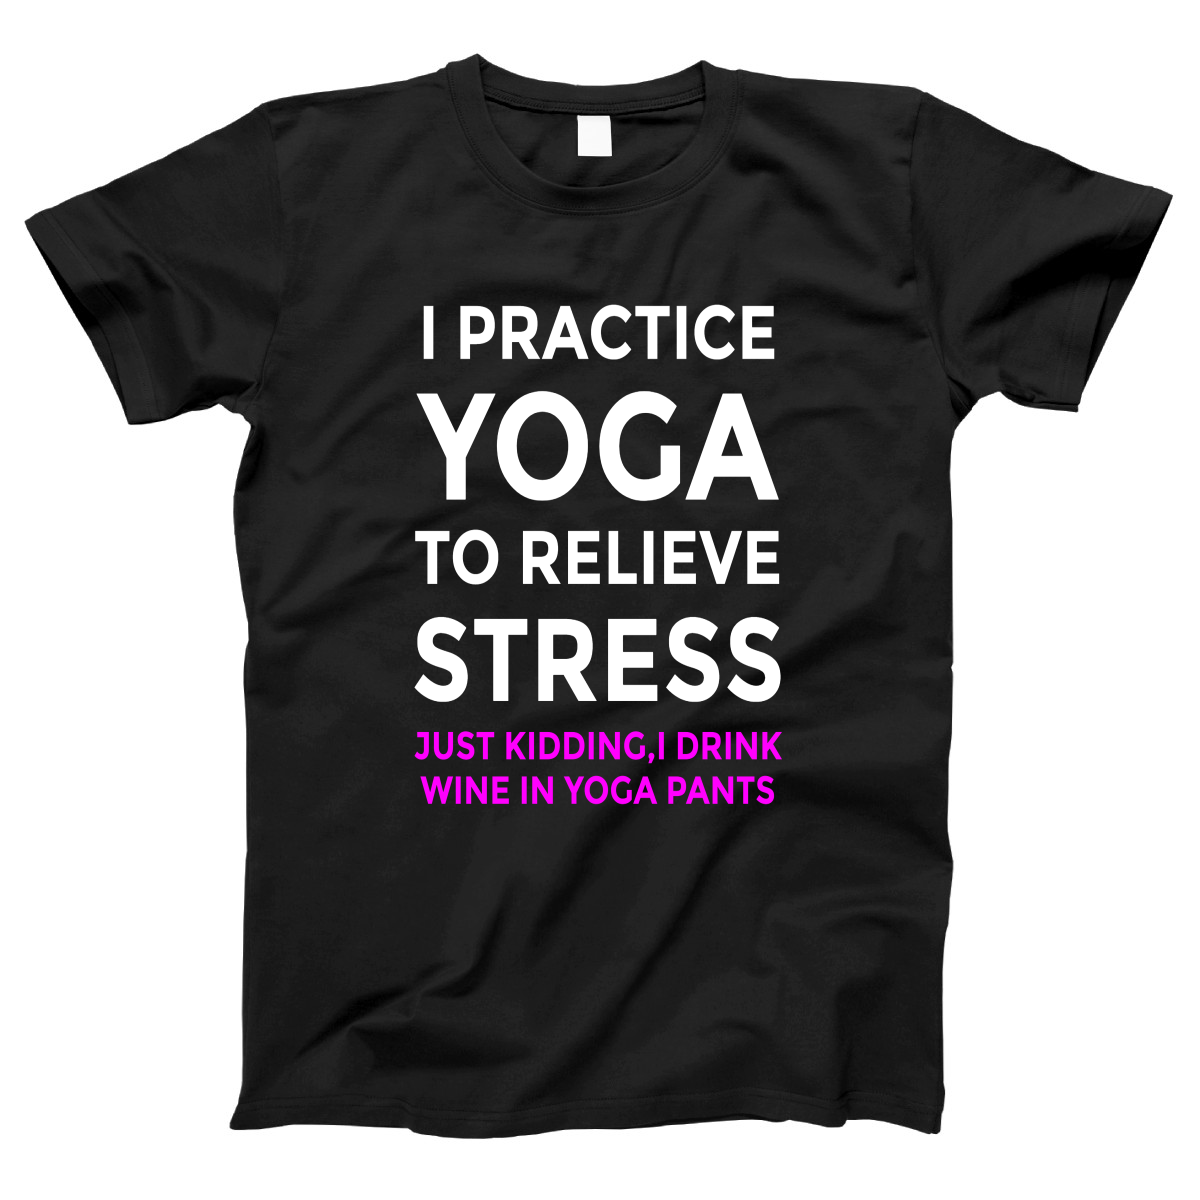 I practice yoga to relieve stress, just kidding I drink wine in yoga pants Women's T-shirt | Black